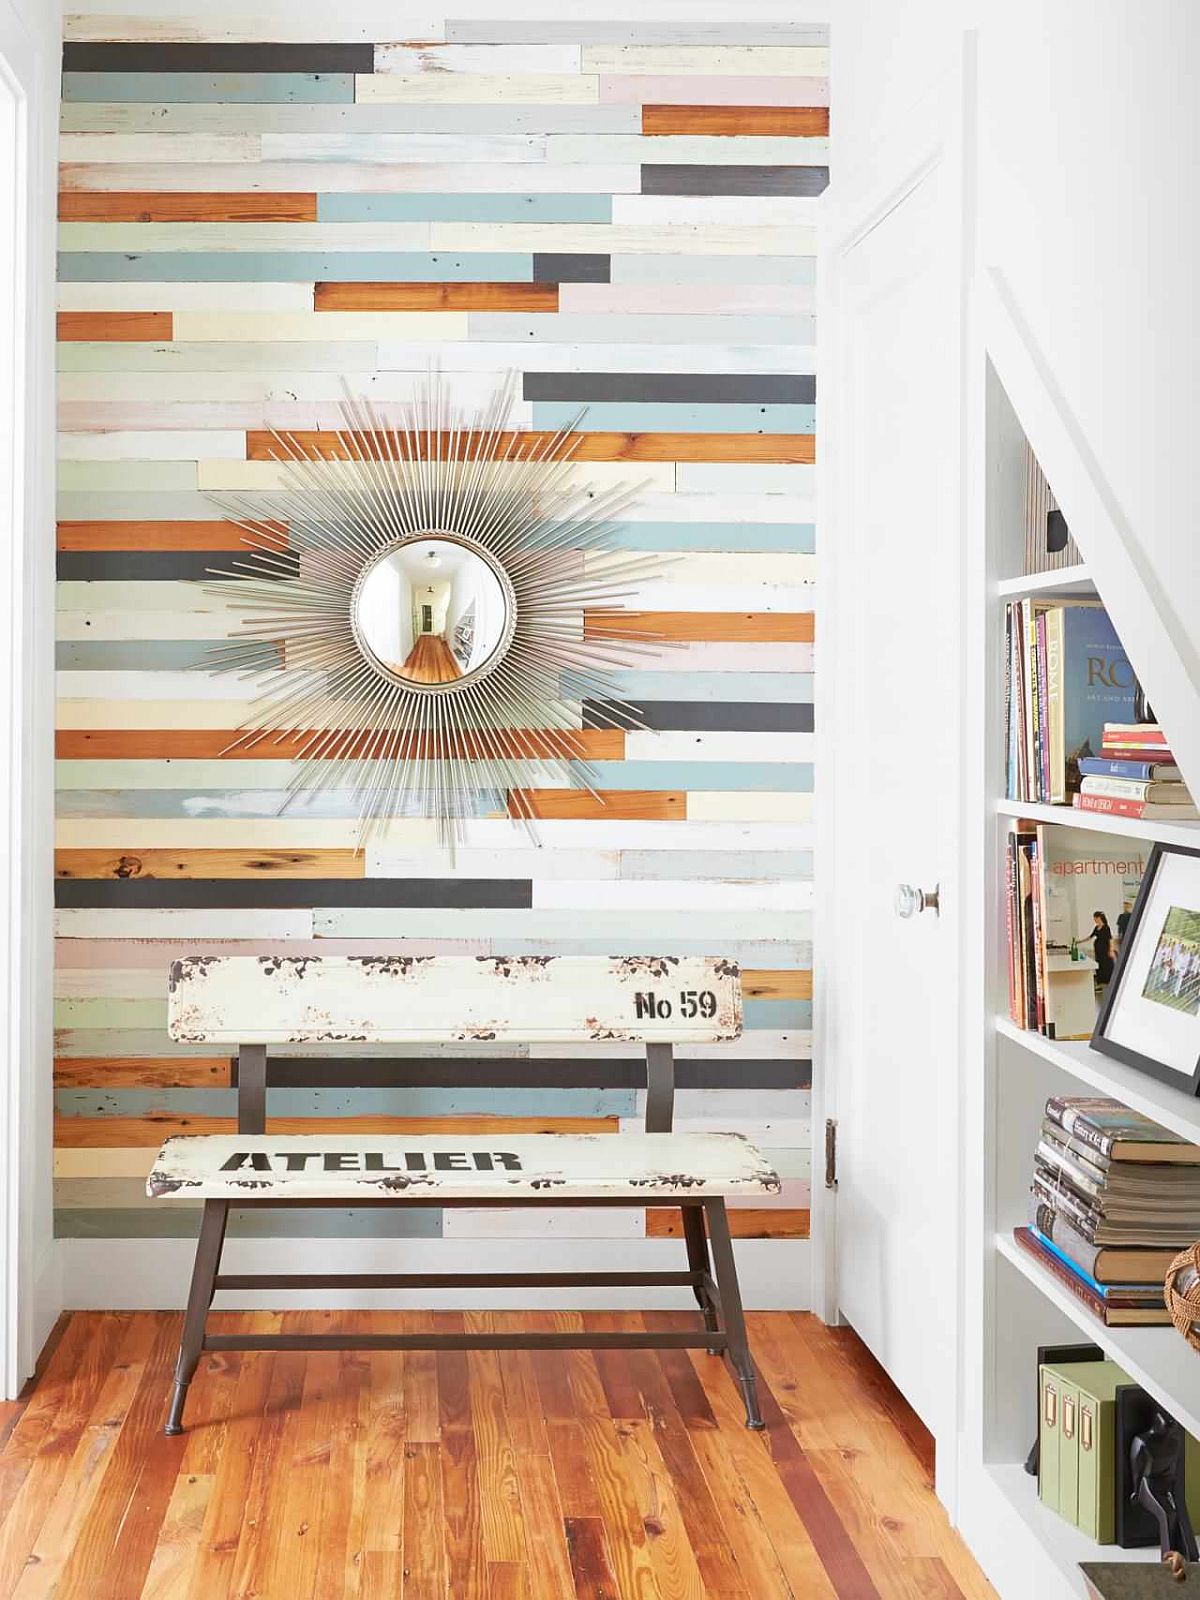 Eye-catching accent wall for the entry was designed using reclaimed floor wood